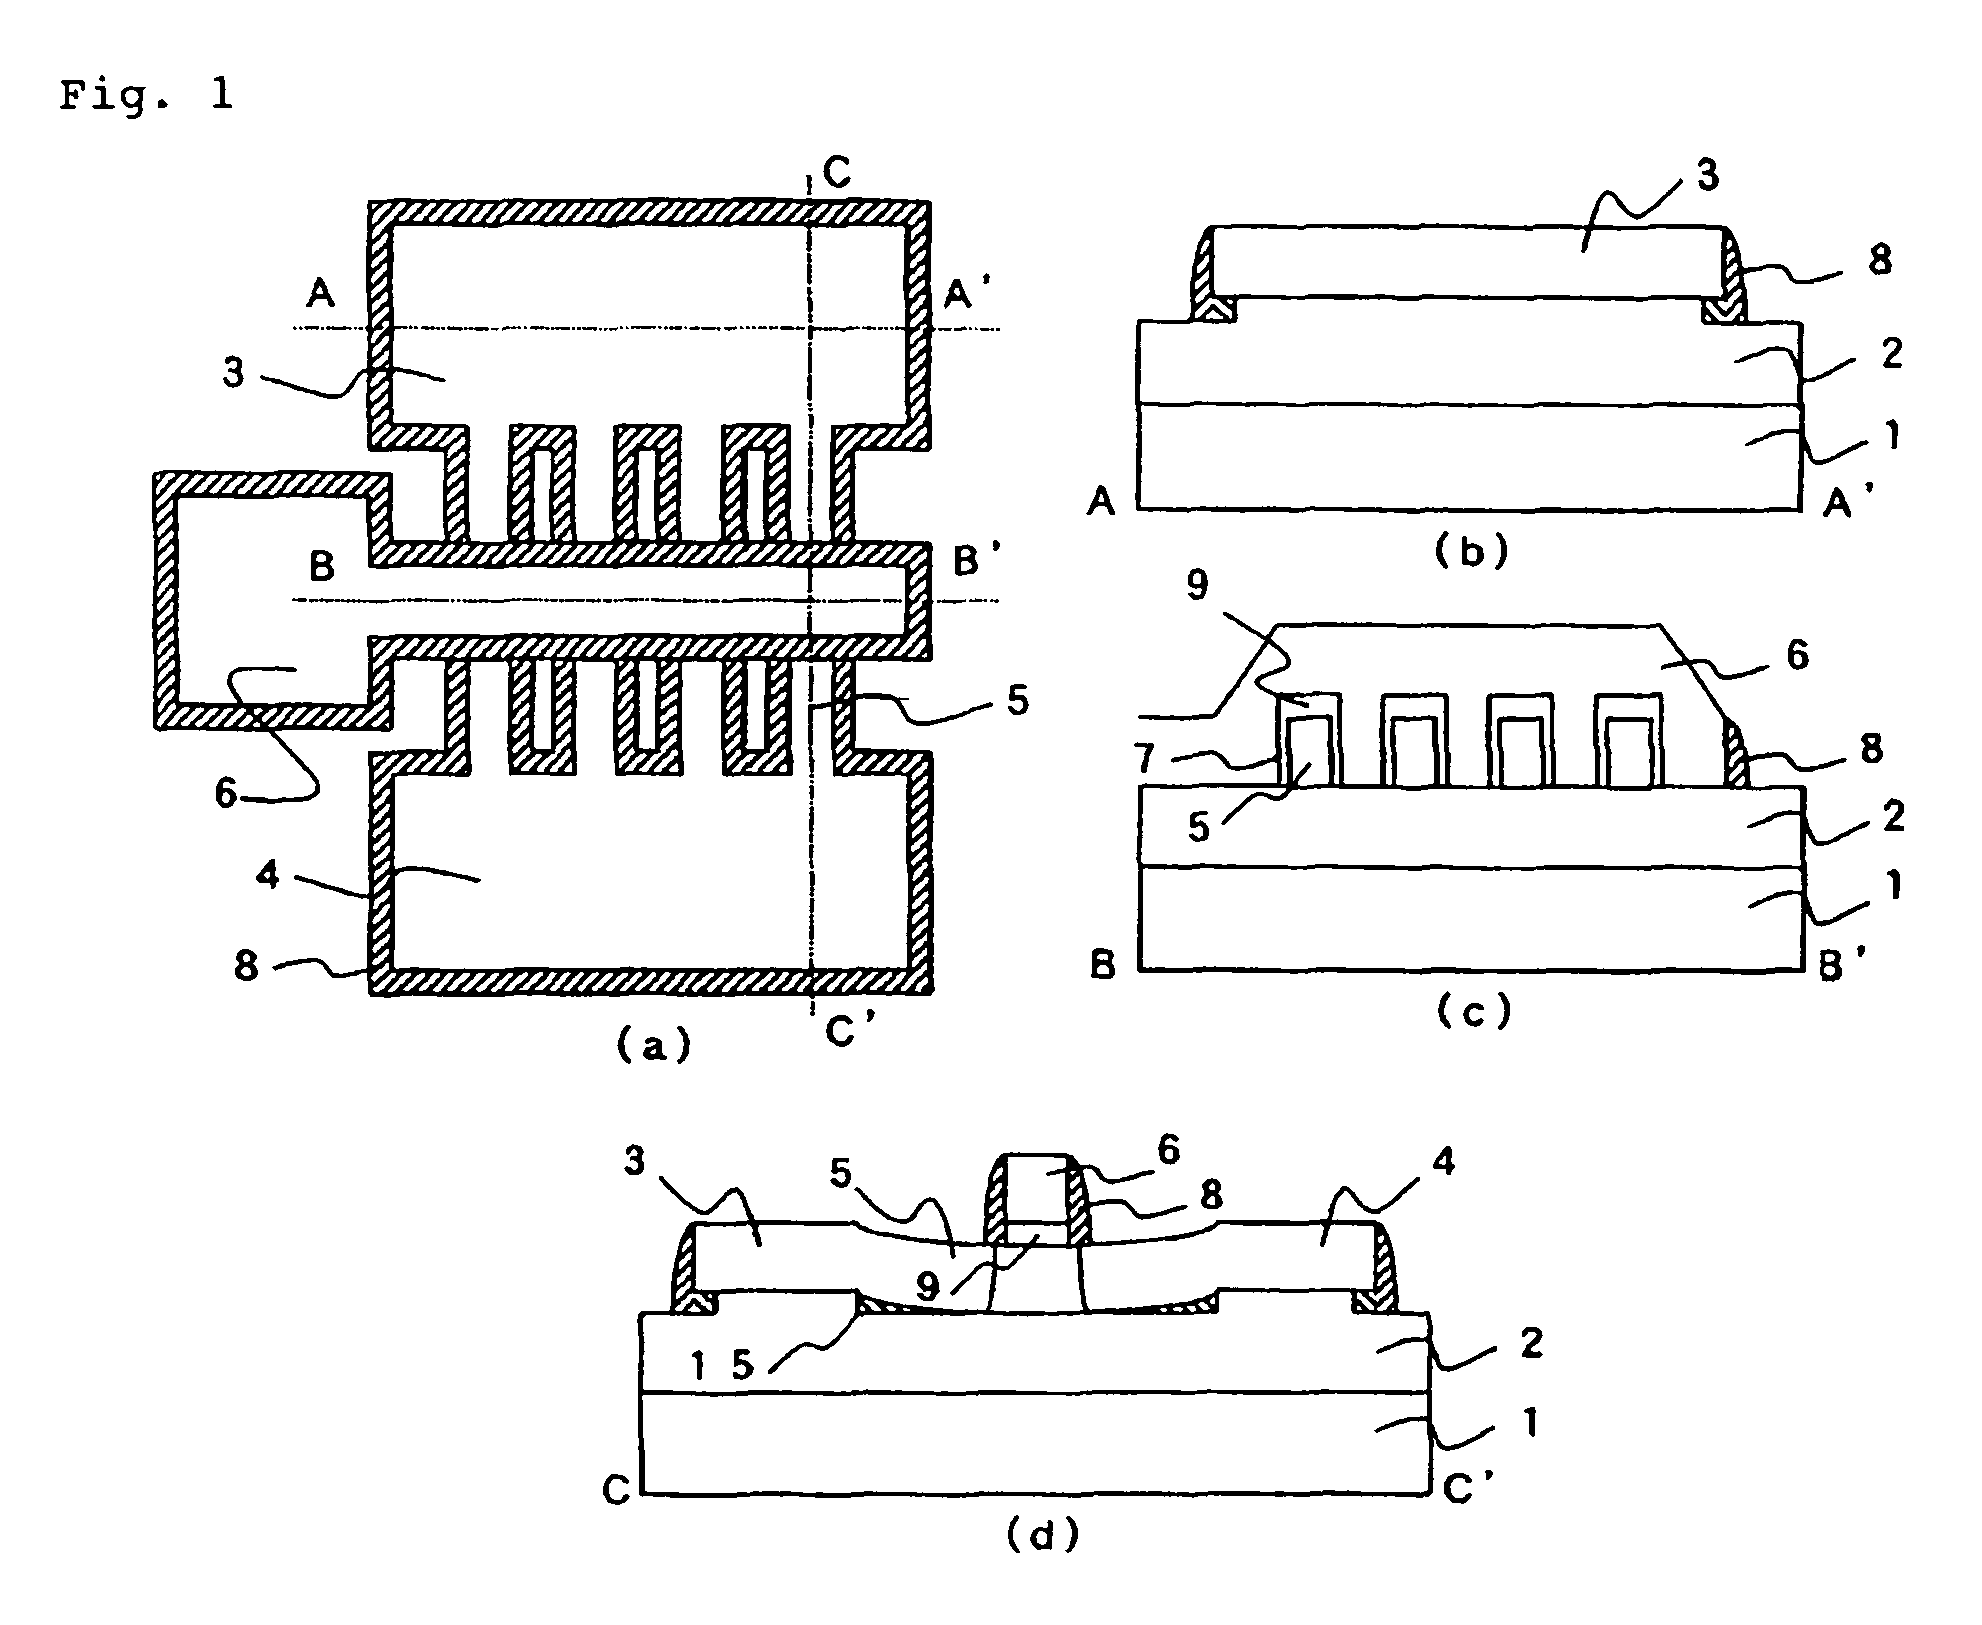 Semiconductor device including a deflected part